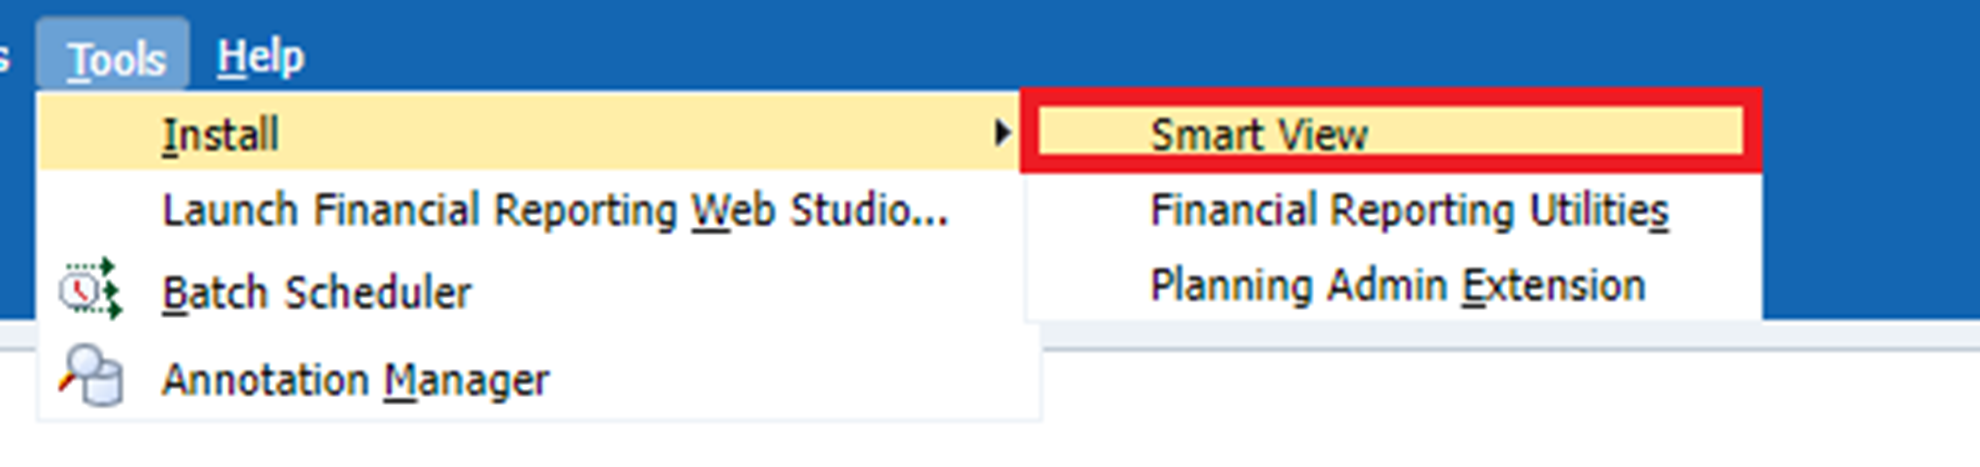 Installing Smart View from dropdown menu in EFIS